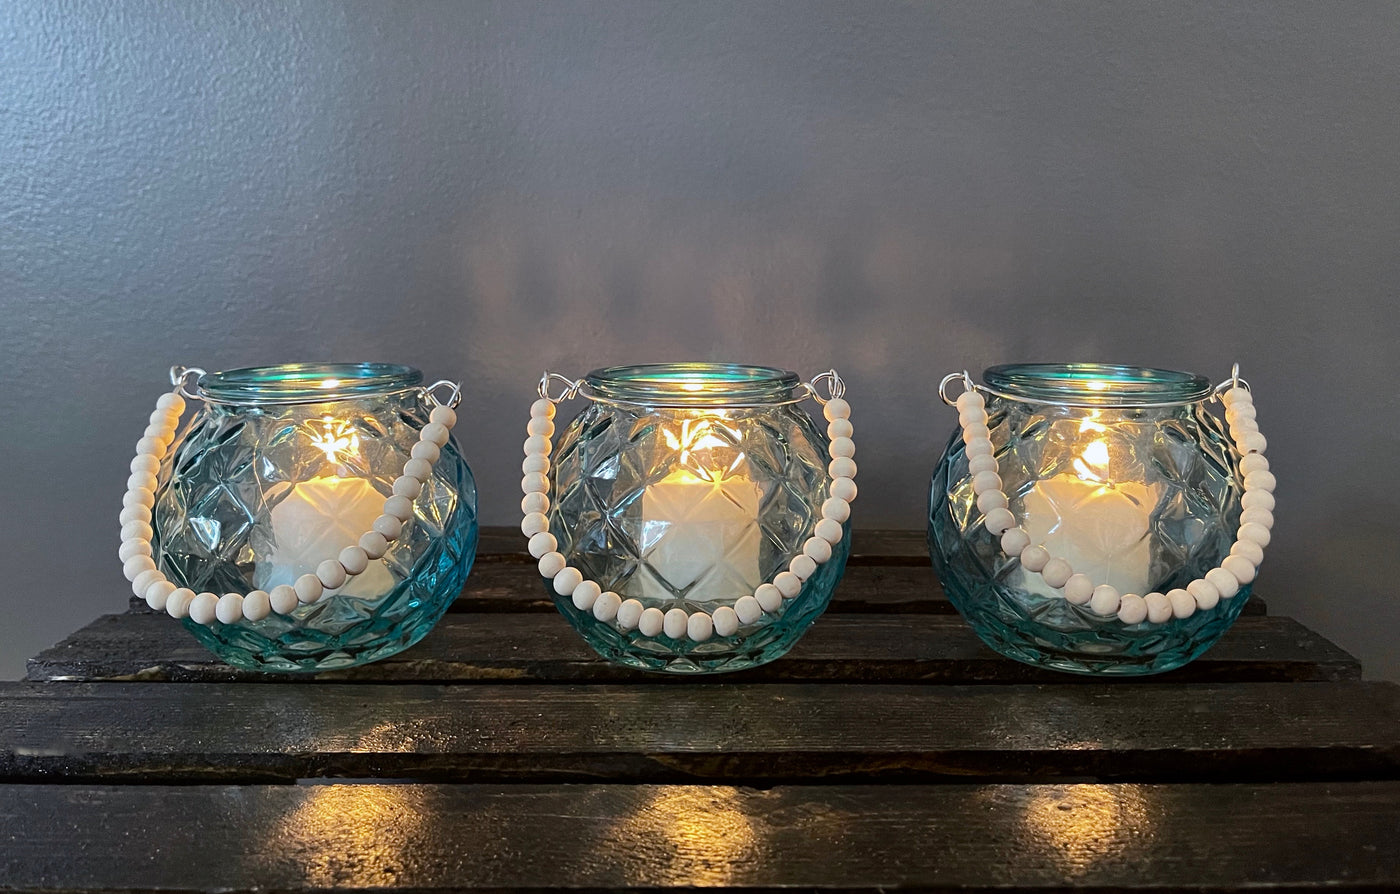 Rent a Rose- Wedding Decor-Adorable diamond patterned Teal glass votive with a handle made of wood beads. The price to rent a single votive including candle is $3.00